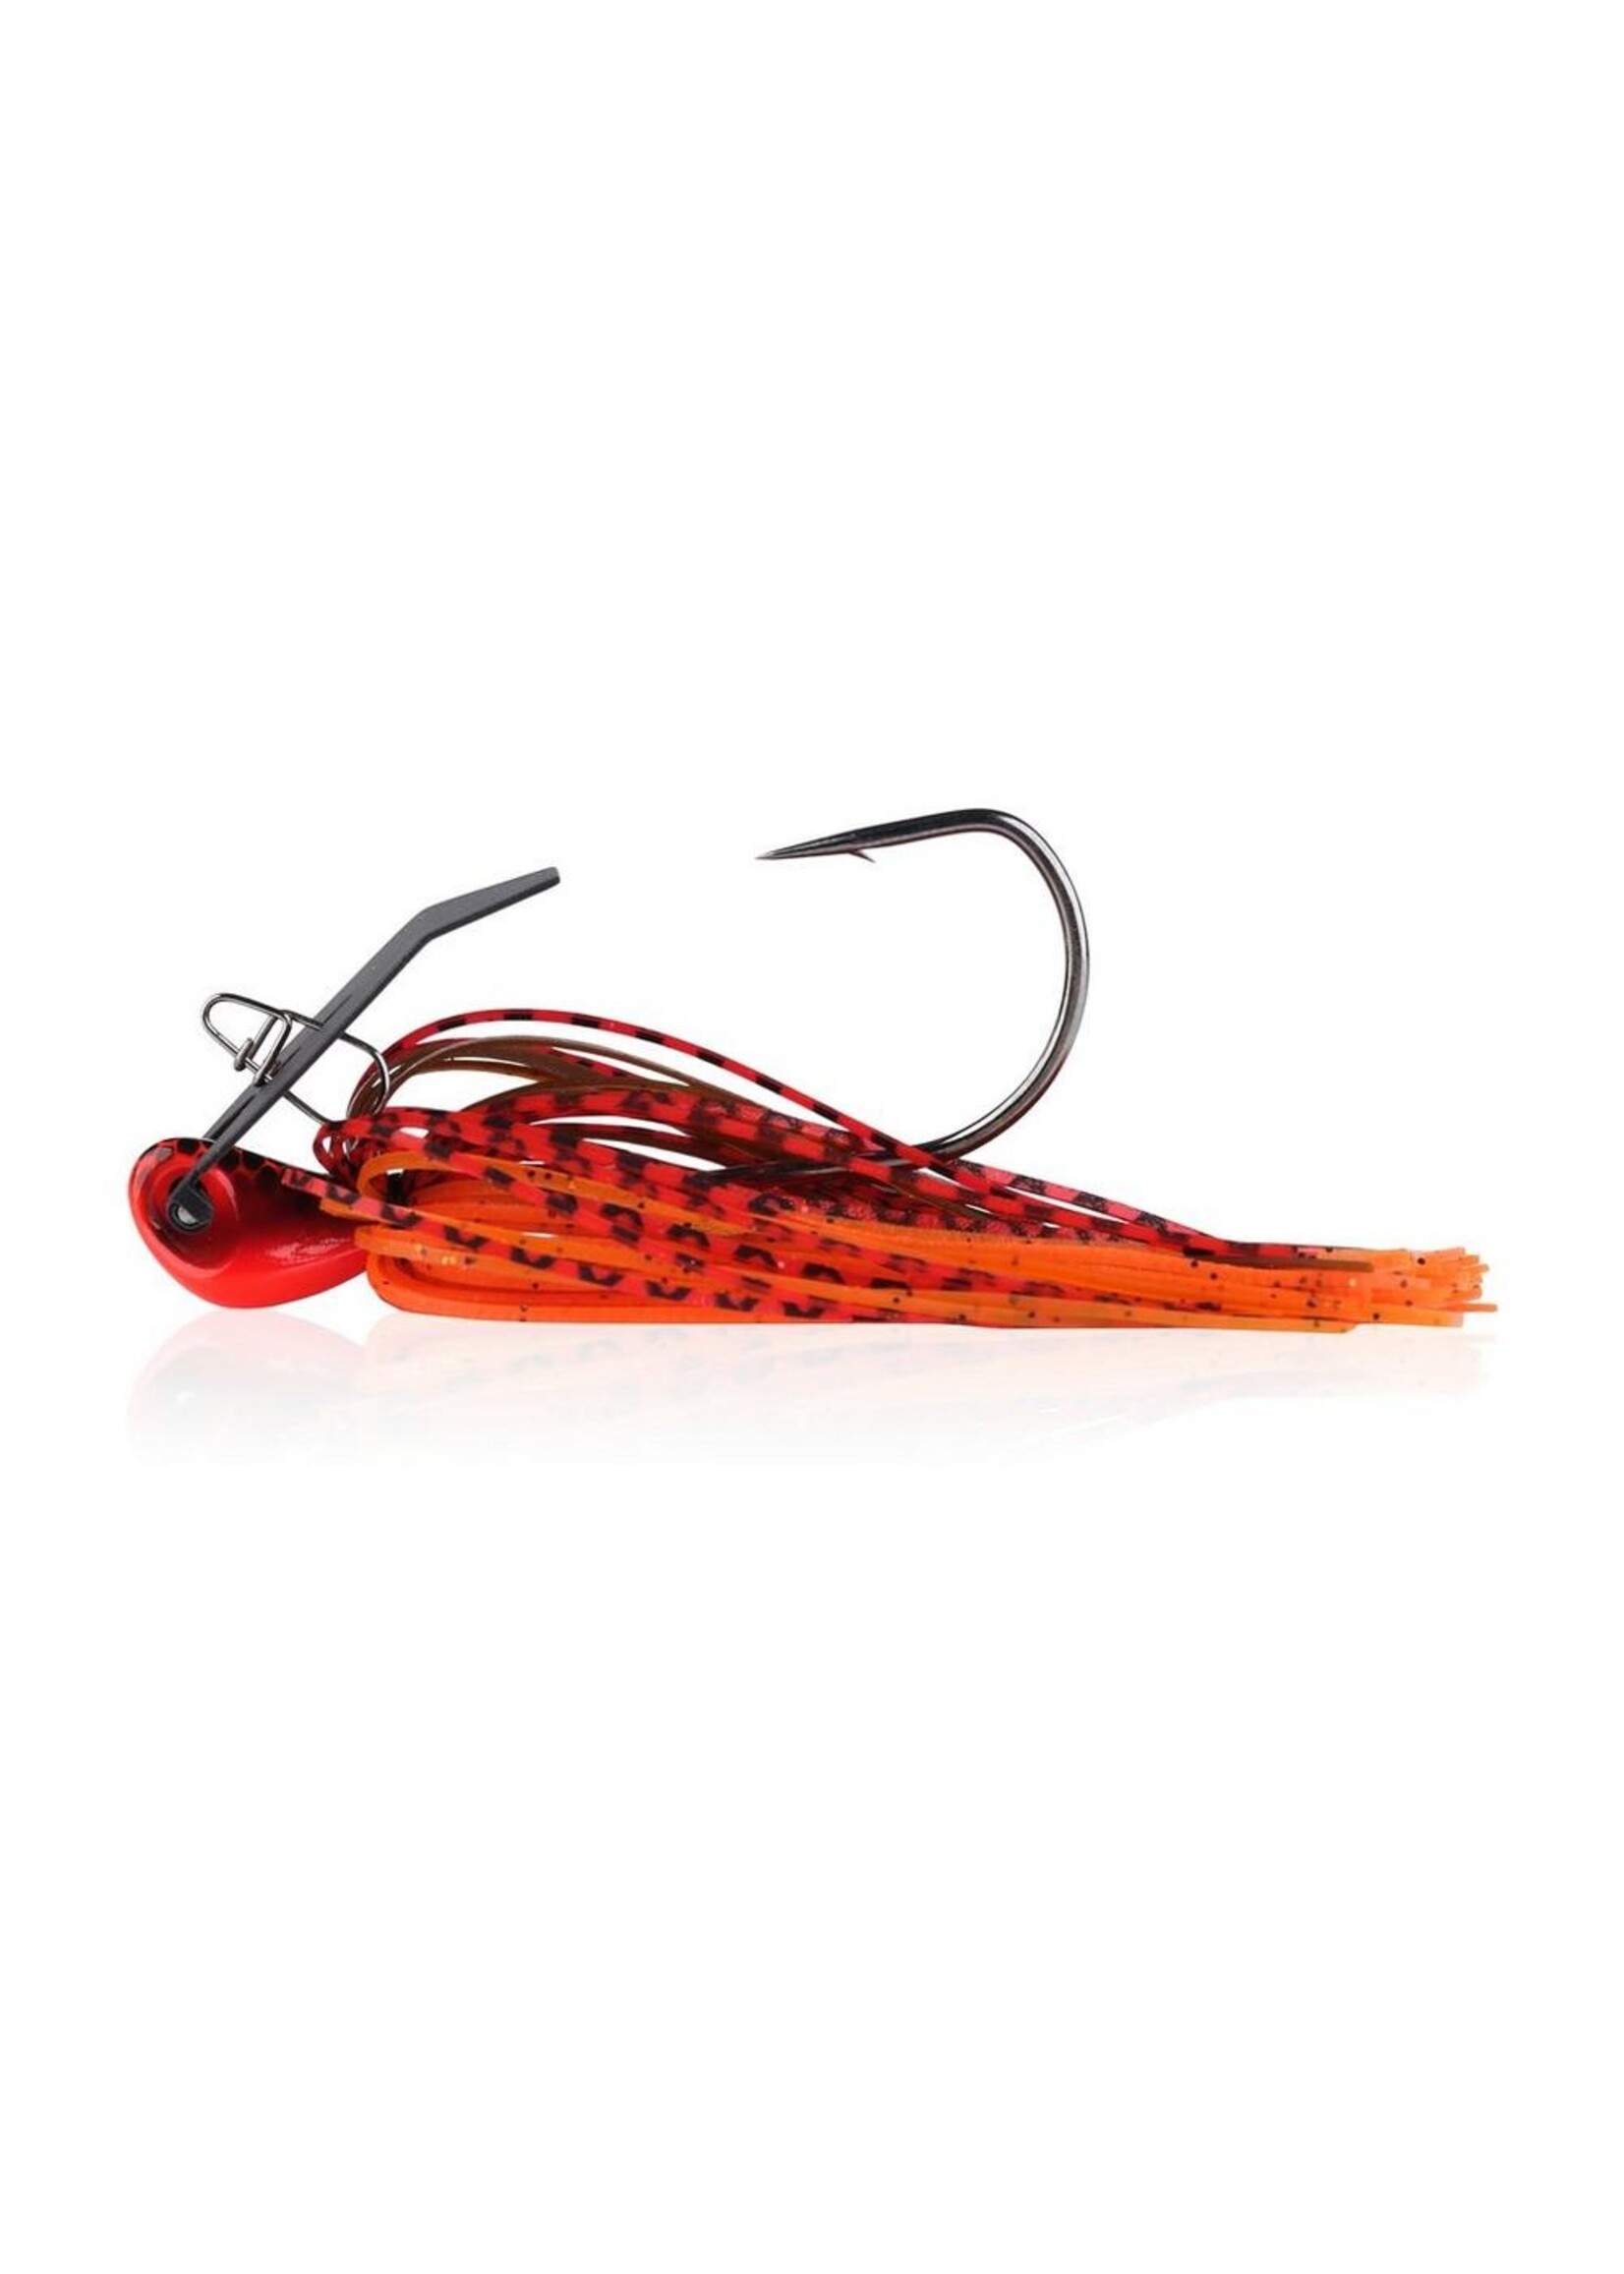 Shop All Berkley Fishing Products